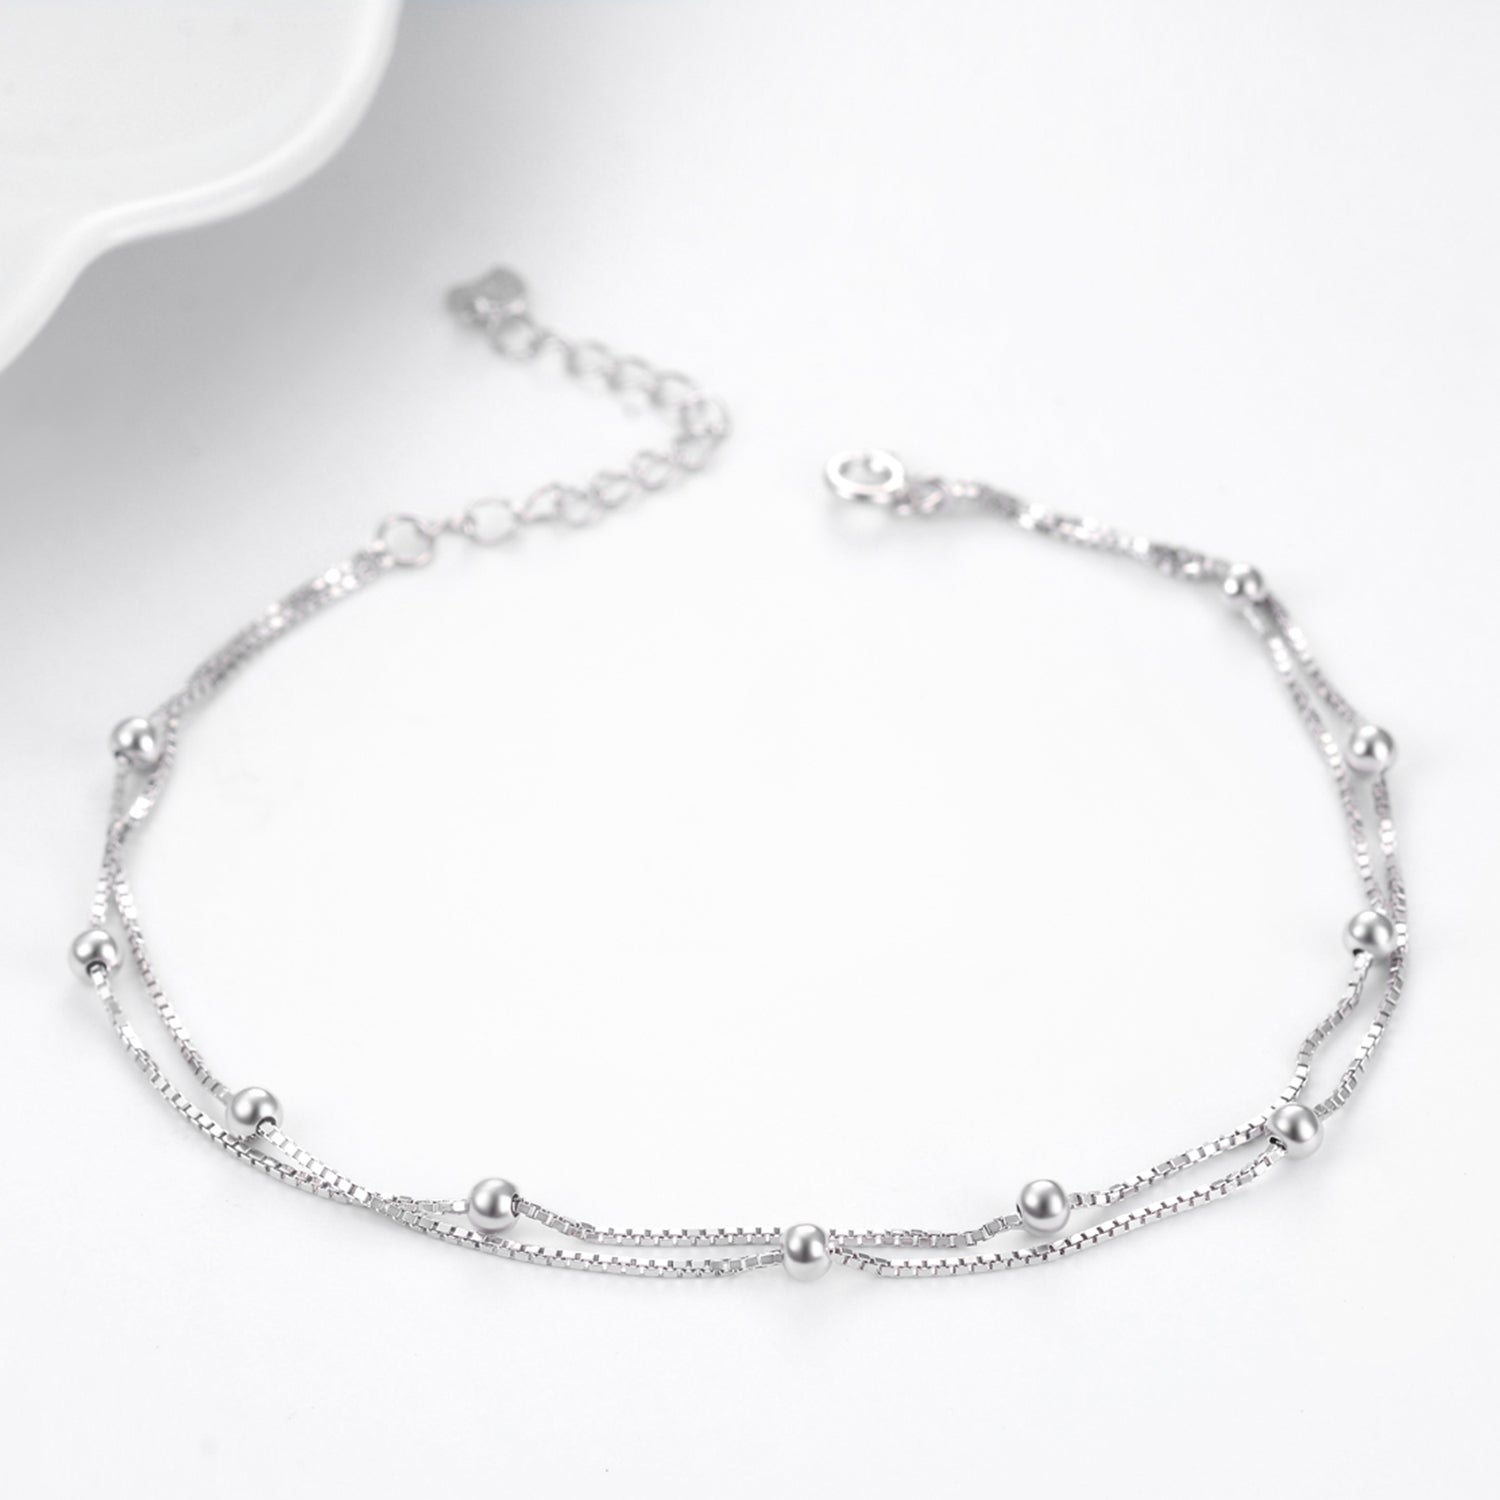 Bead Anklet Summer Jewelry Foot Accessory Silver Anklet Women